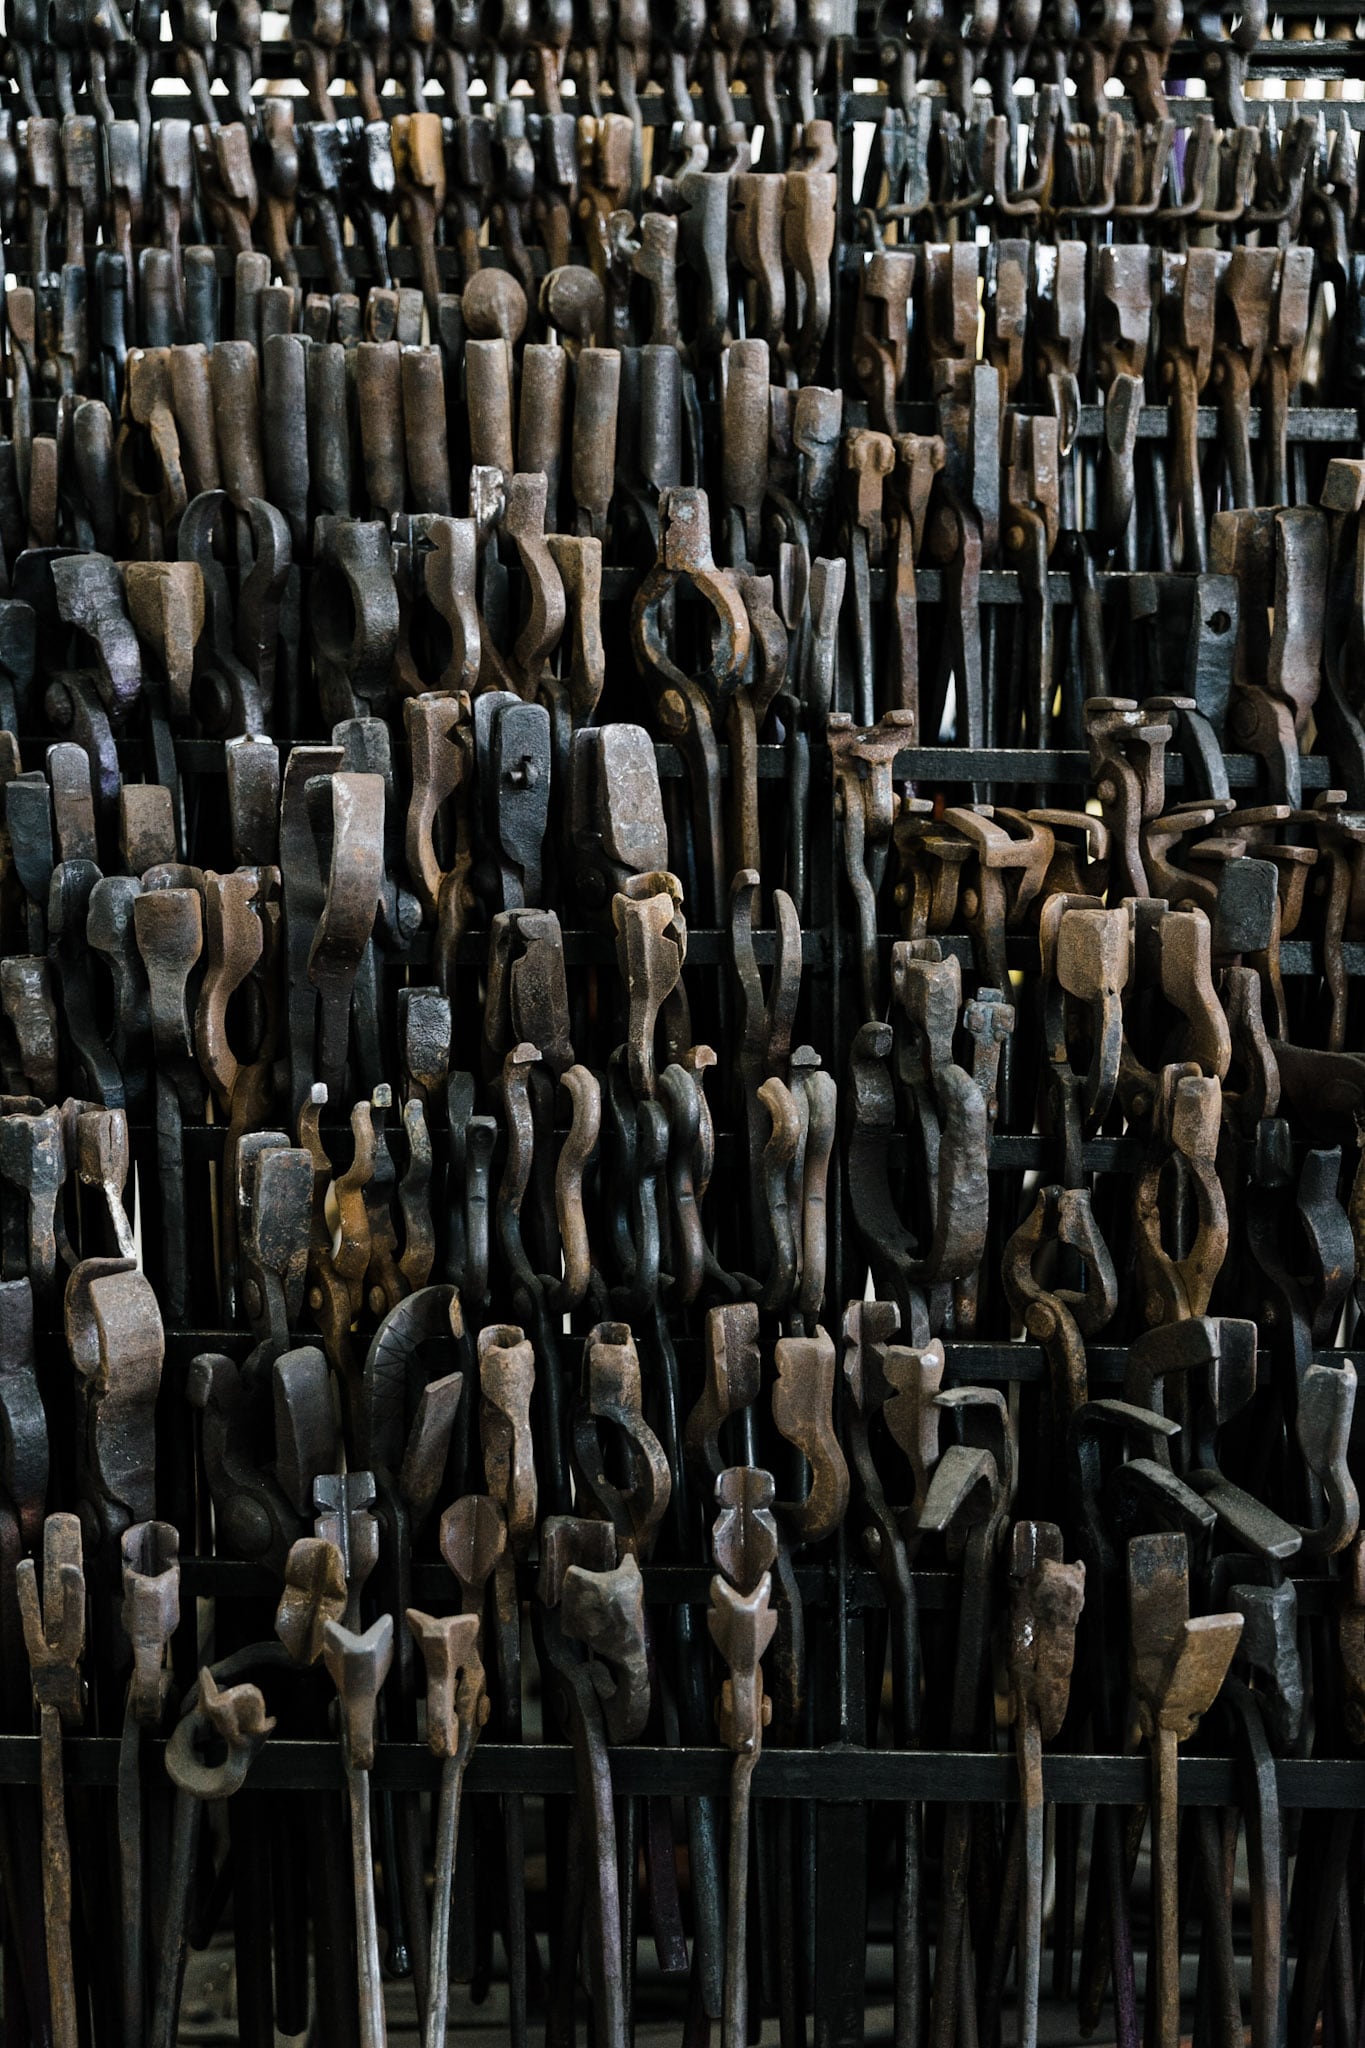 Blacksmithing tools lined up on racks at Adam's Forge in Los Angeles, CA.